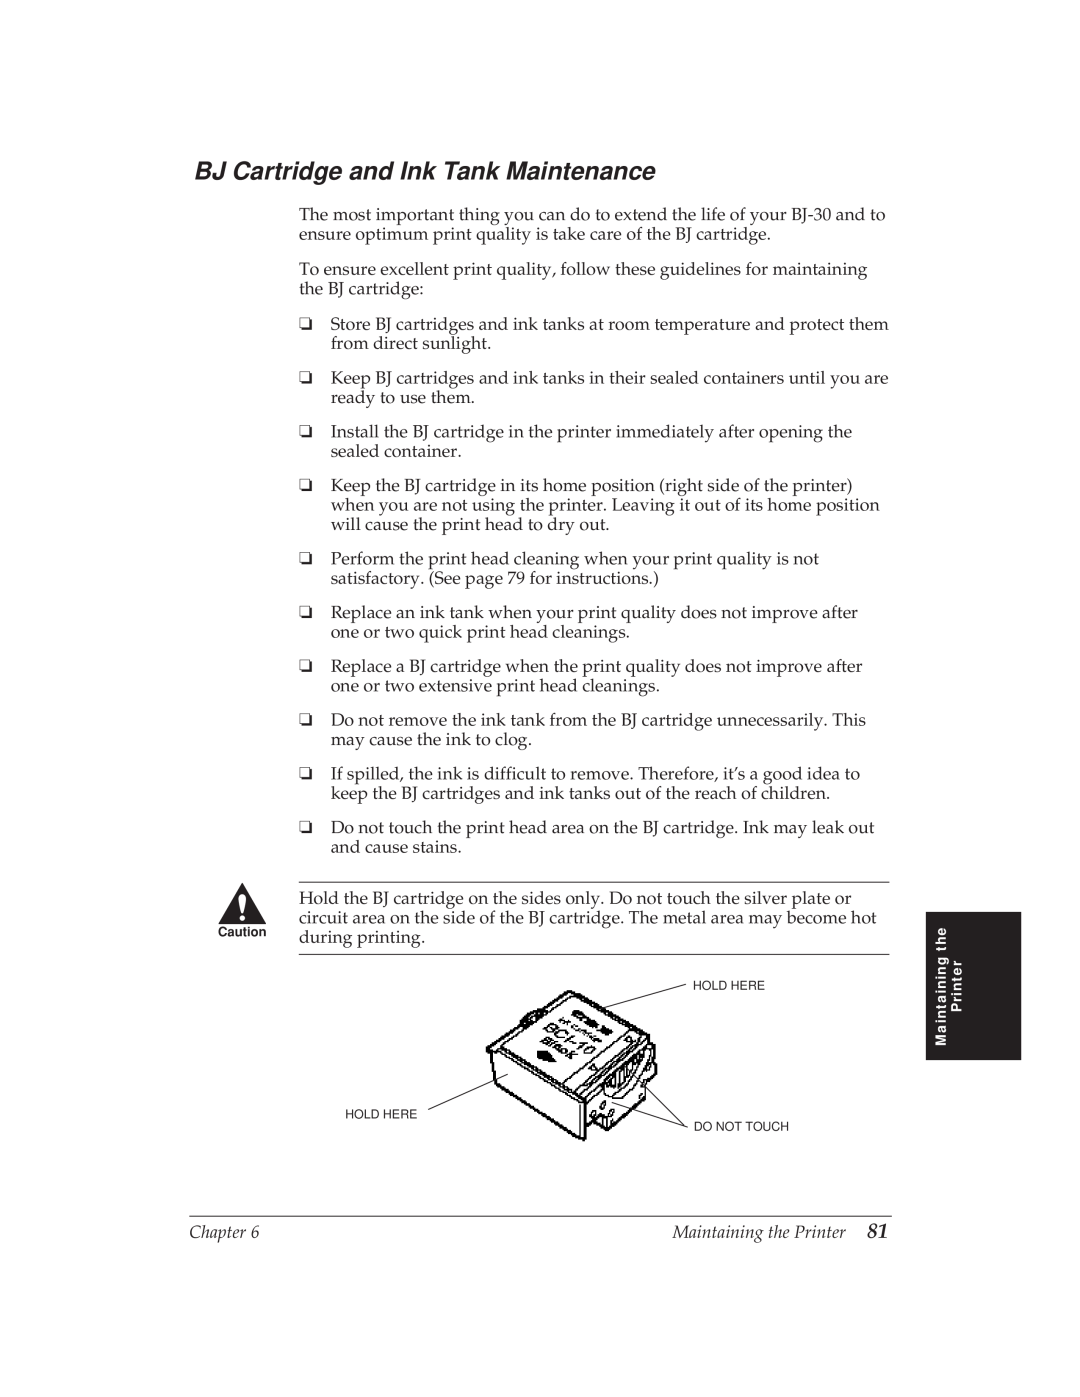 Canon BJ-30 manual BJ Cartridge and Ink Tank Maintenance, Hold Here Hold Here Do Not Touch 